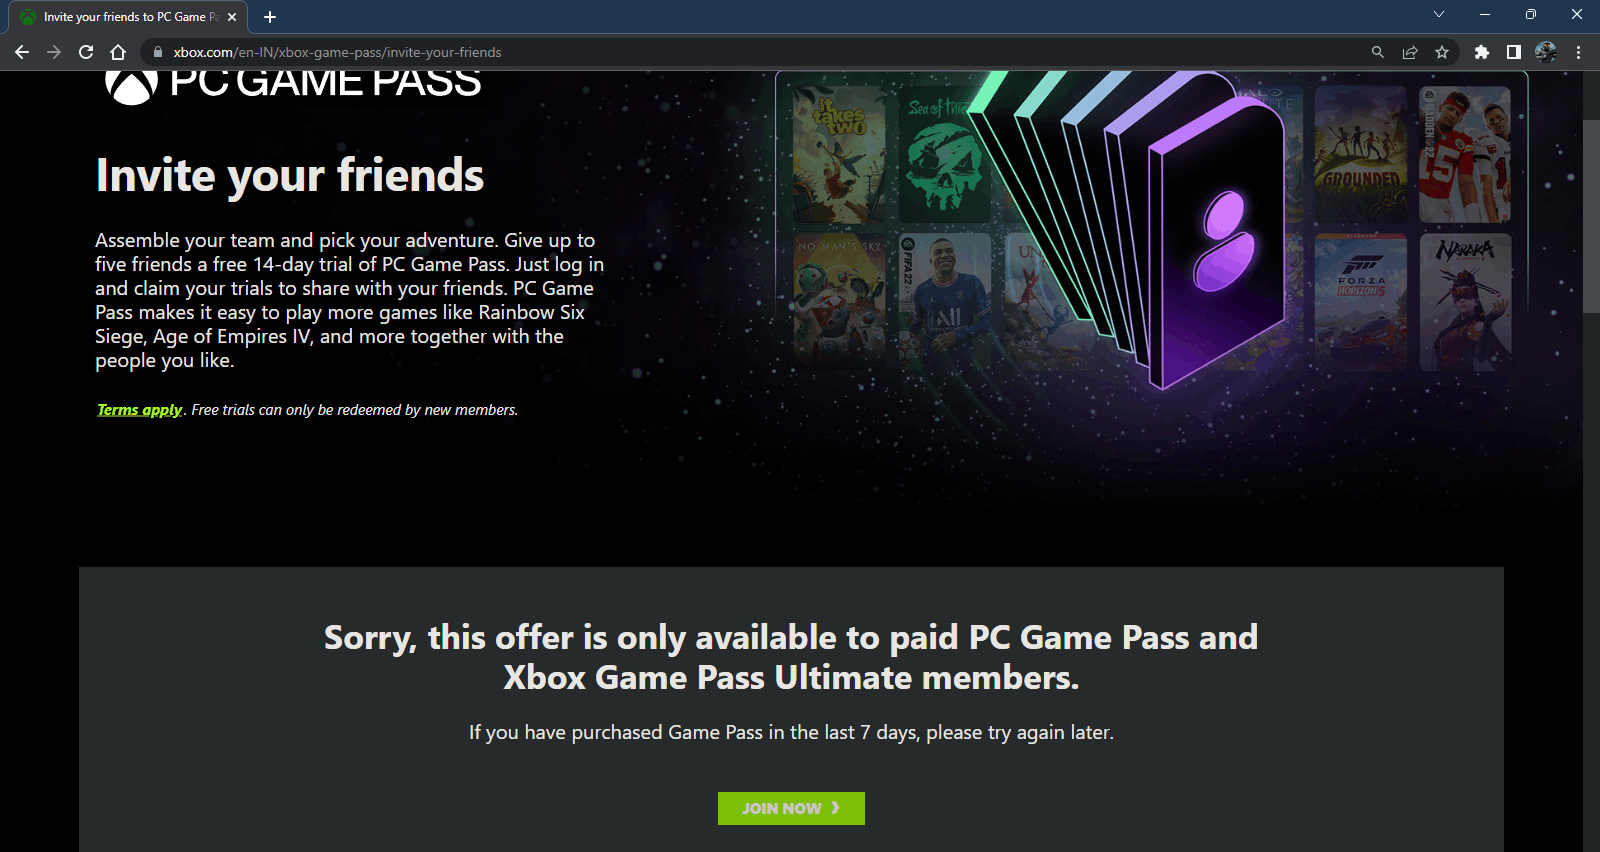 HOW TO SHARE MY GAME PASS WITH MY FRIENDS AND FAMILY? - Microsoft